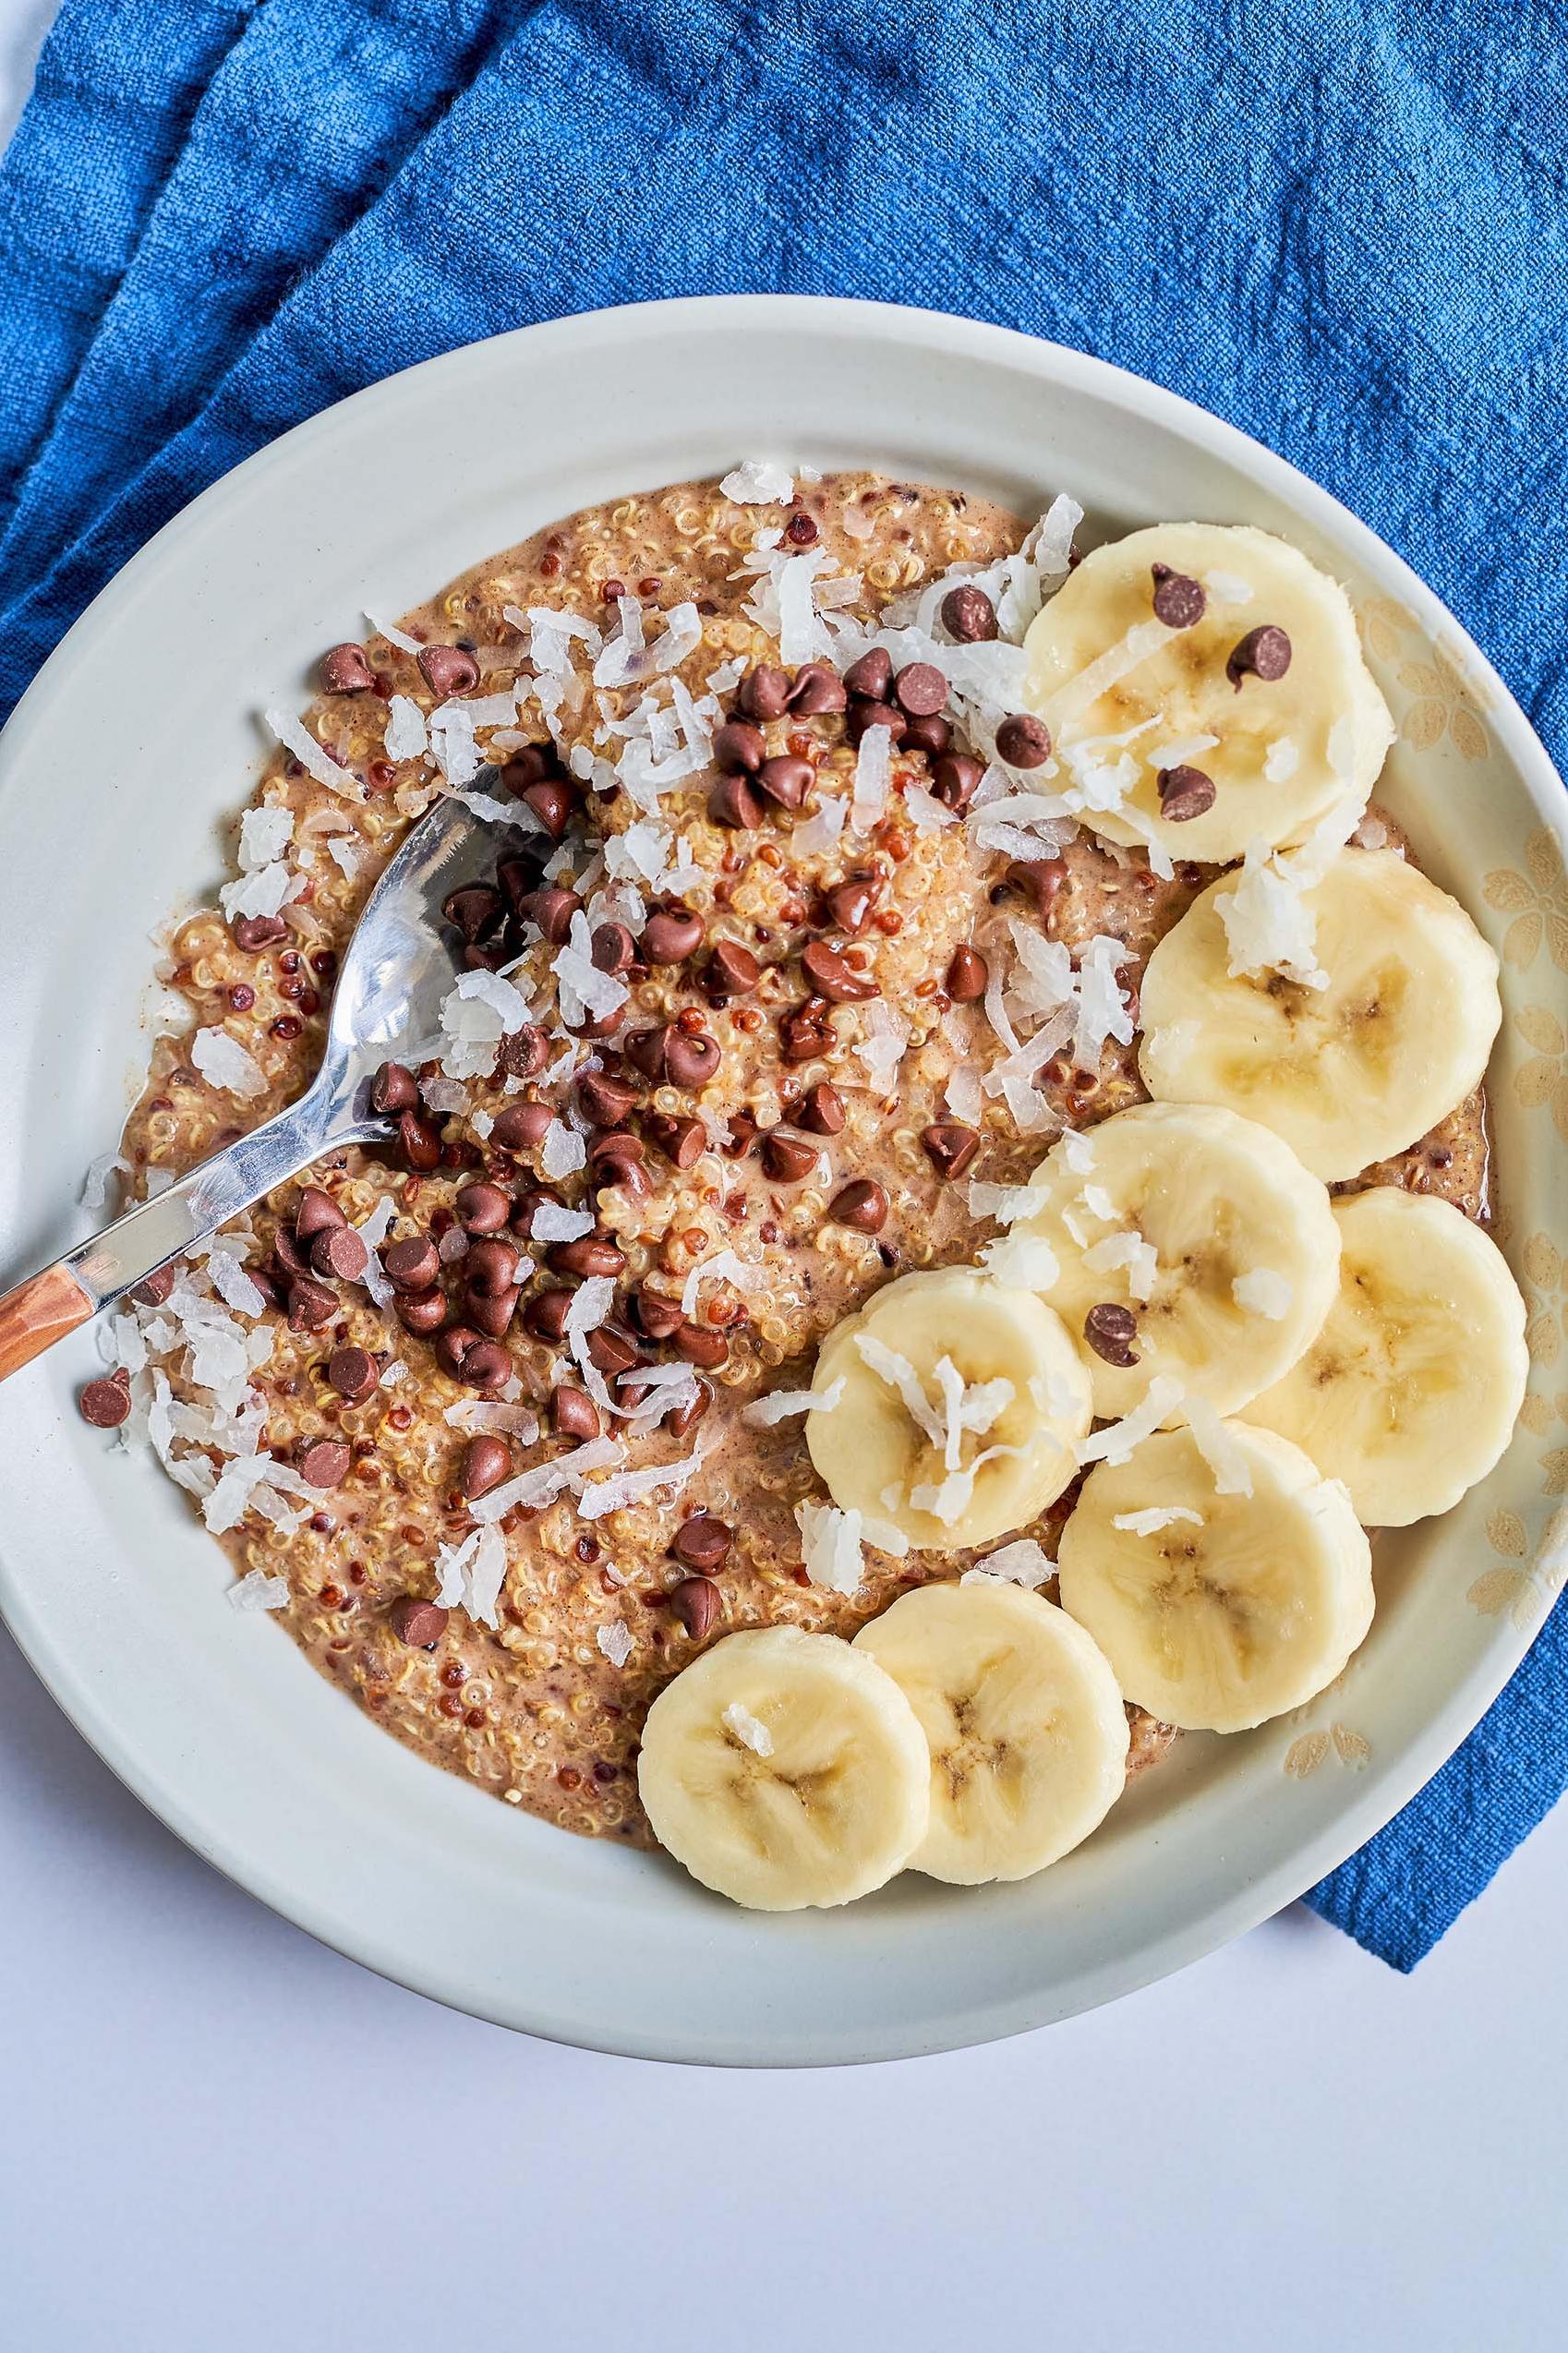  Wake up and start your day with a hearty and healthy Quinoa Rice Breakfast!